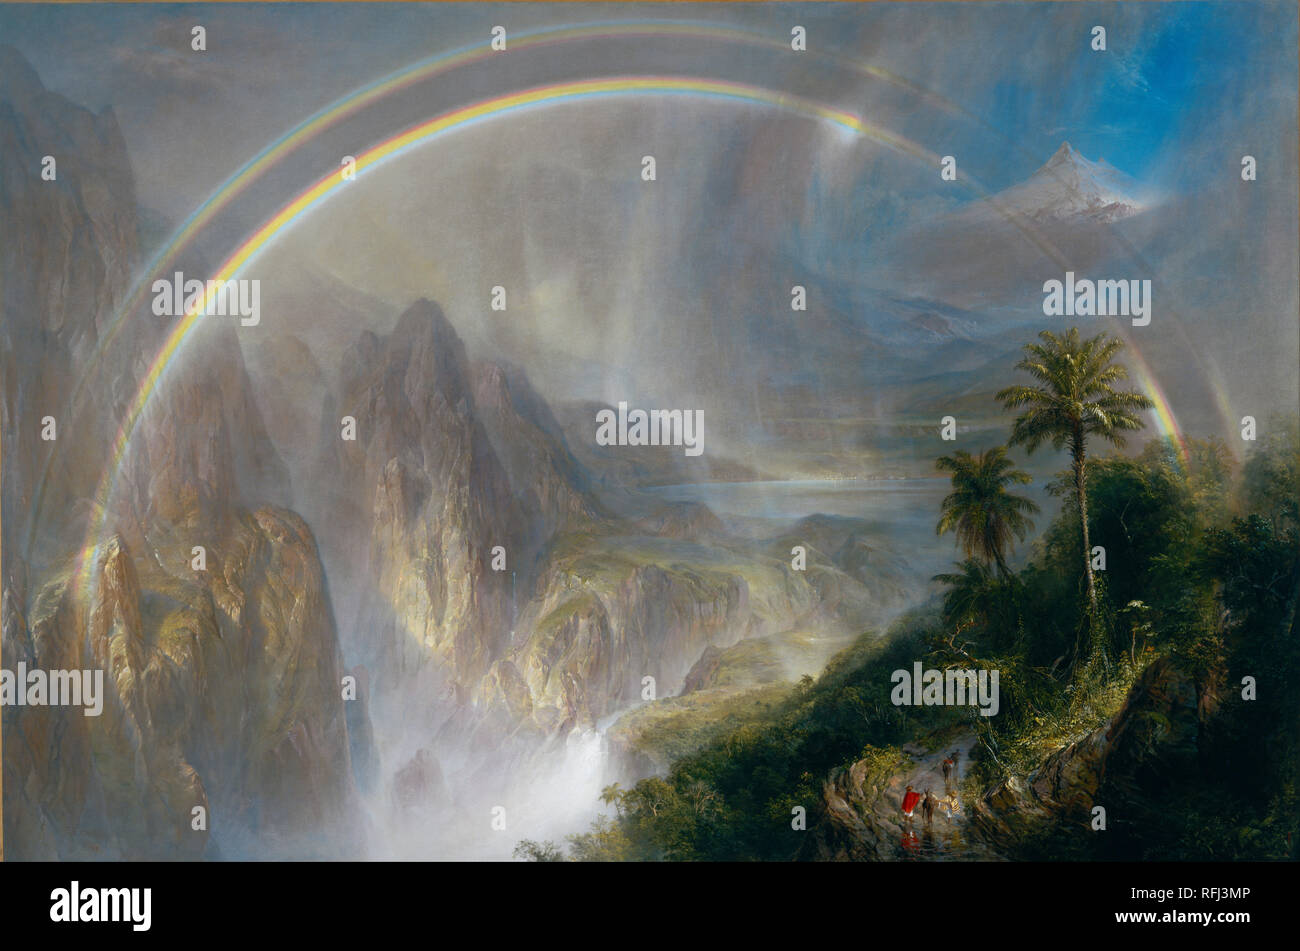 Rainy Season in the Tropics. Date/Period: 1866. Painting. Oil on canvas. Height: 1,428.75 mm (56.25 in); Width: 2,139.95 mm (84.25 in). Author: FREDERIC EDWIN CHURCH. CHURCH, FREDERIC EDWIN. Stock Photo